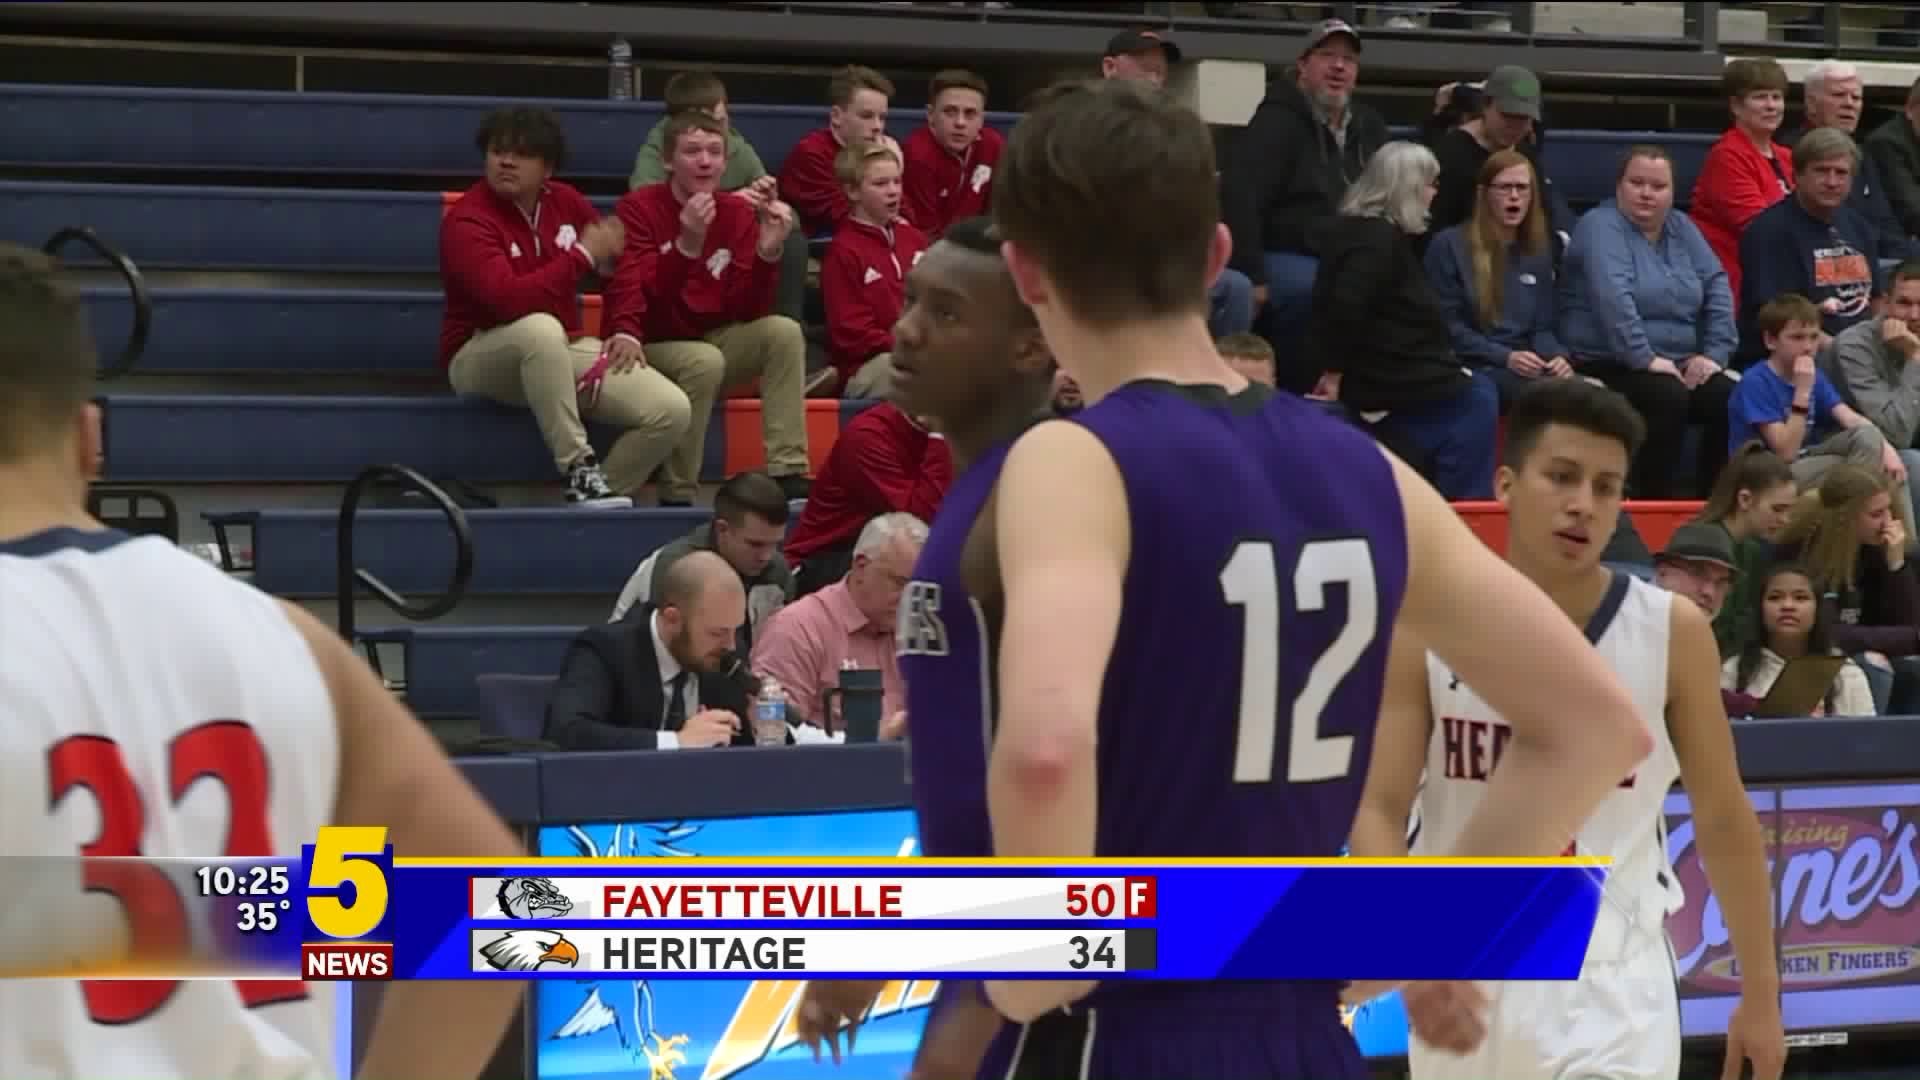 Boys: Fayetteville at Heritage